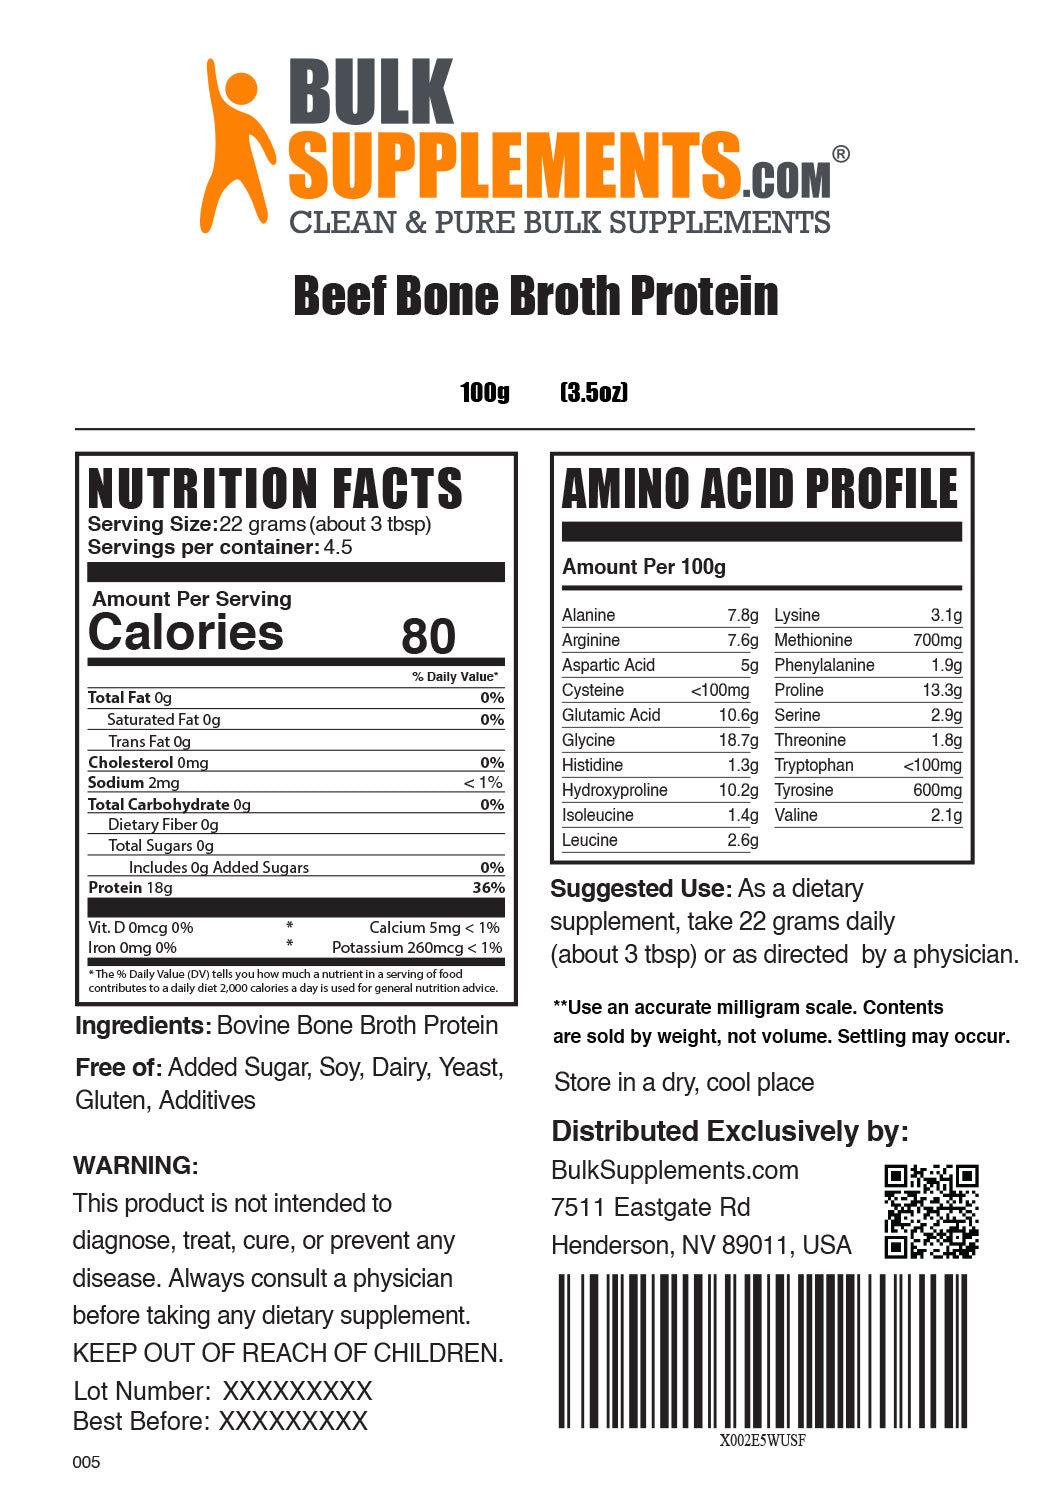 Beef Bone Broth Protein Powder Supplement Facts and Serving Size